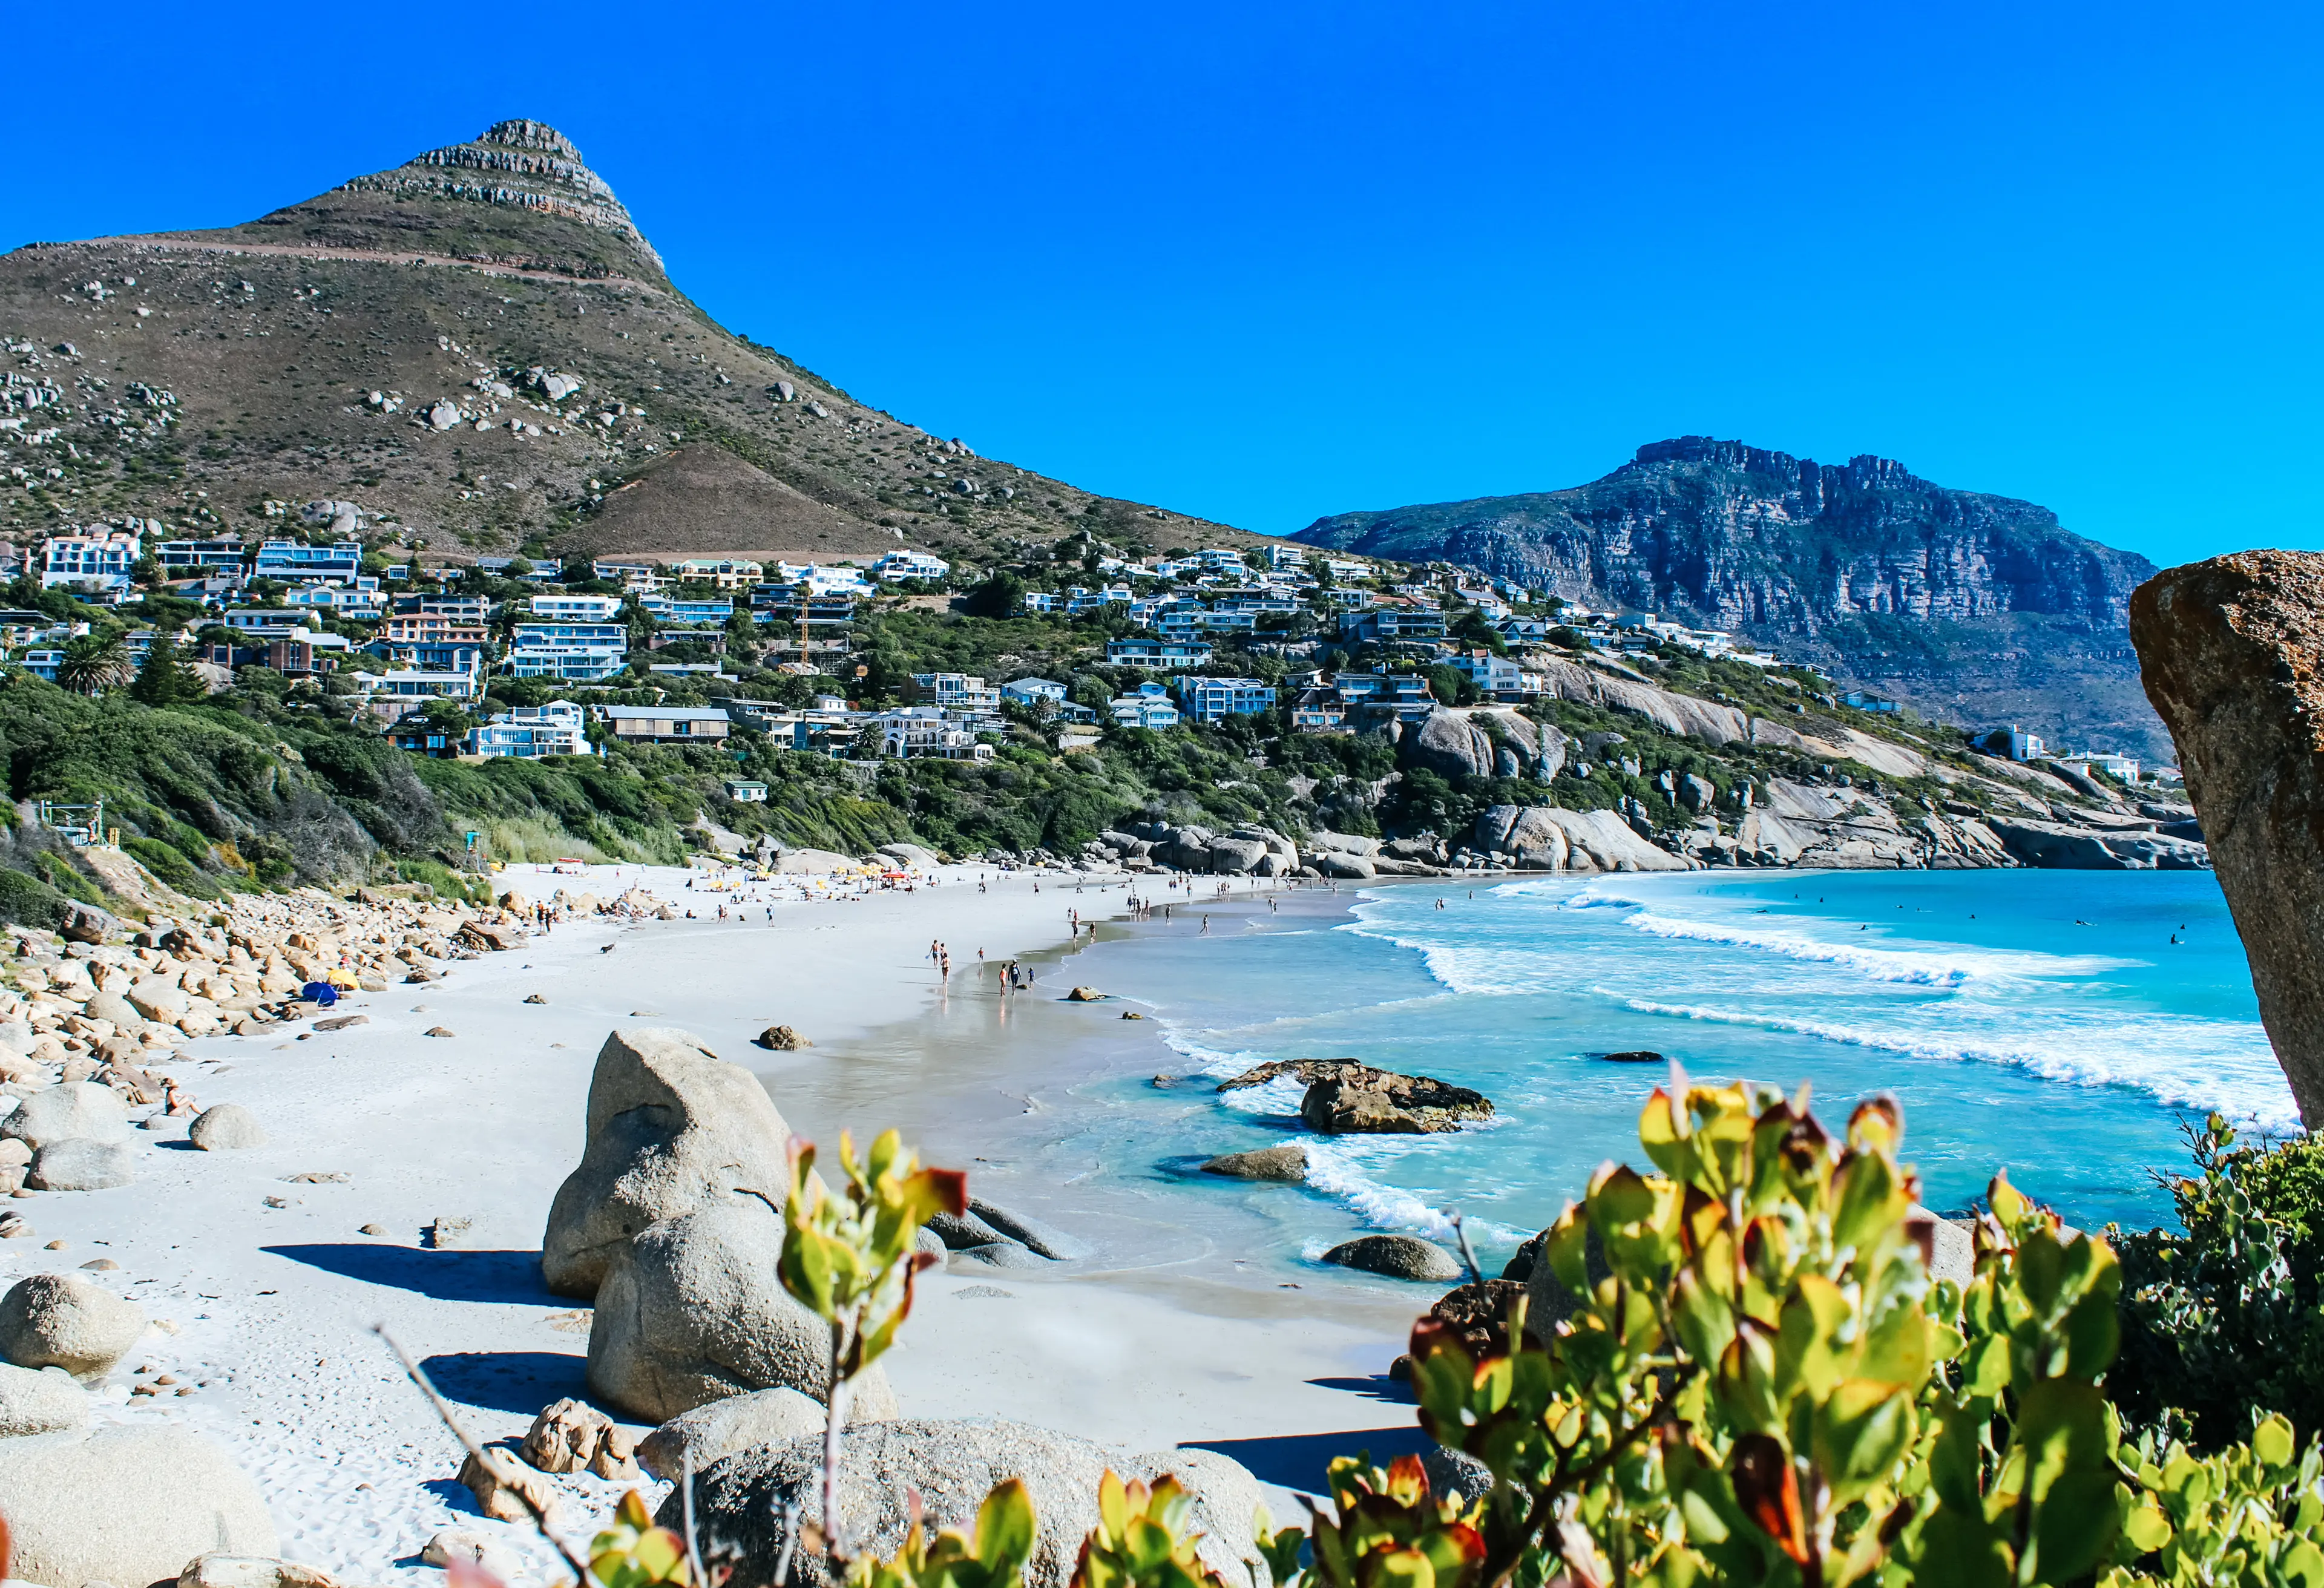 4-Day Adventure and Wine Tour for Couples in Cape Town